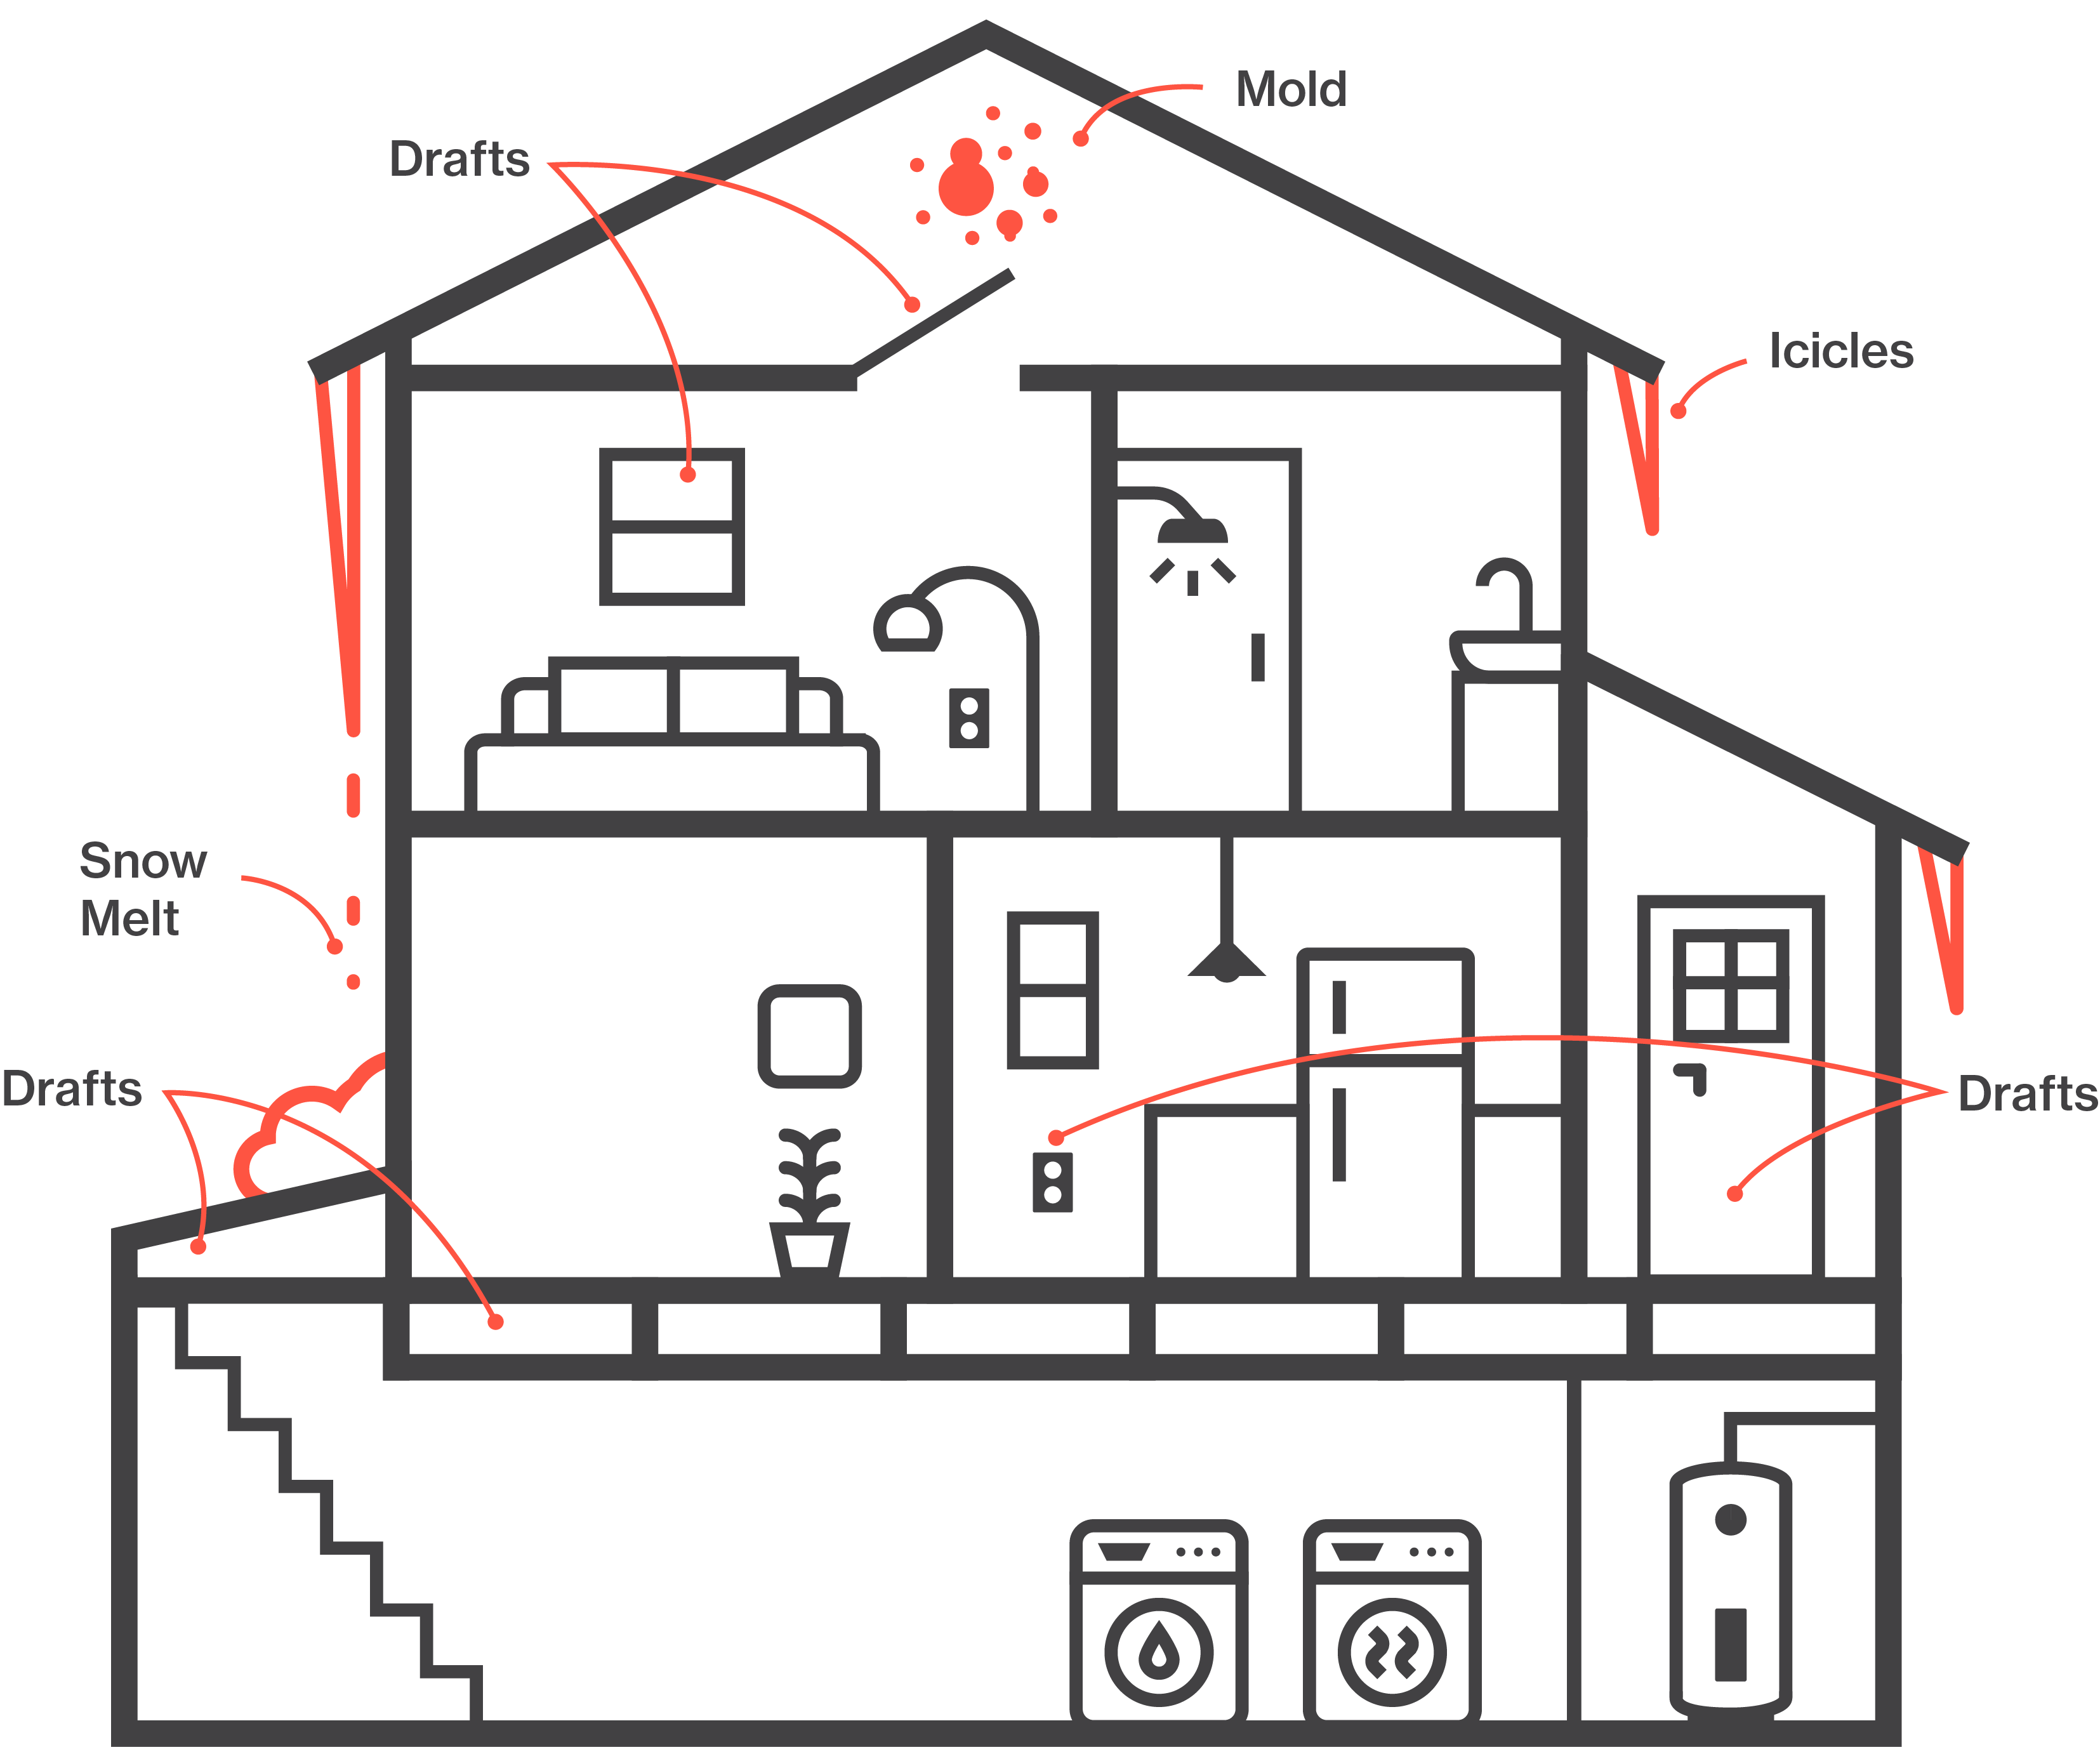 Diagram of a house showing common places for snowmelt, mold, drafts, and icicles